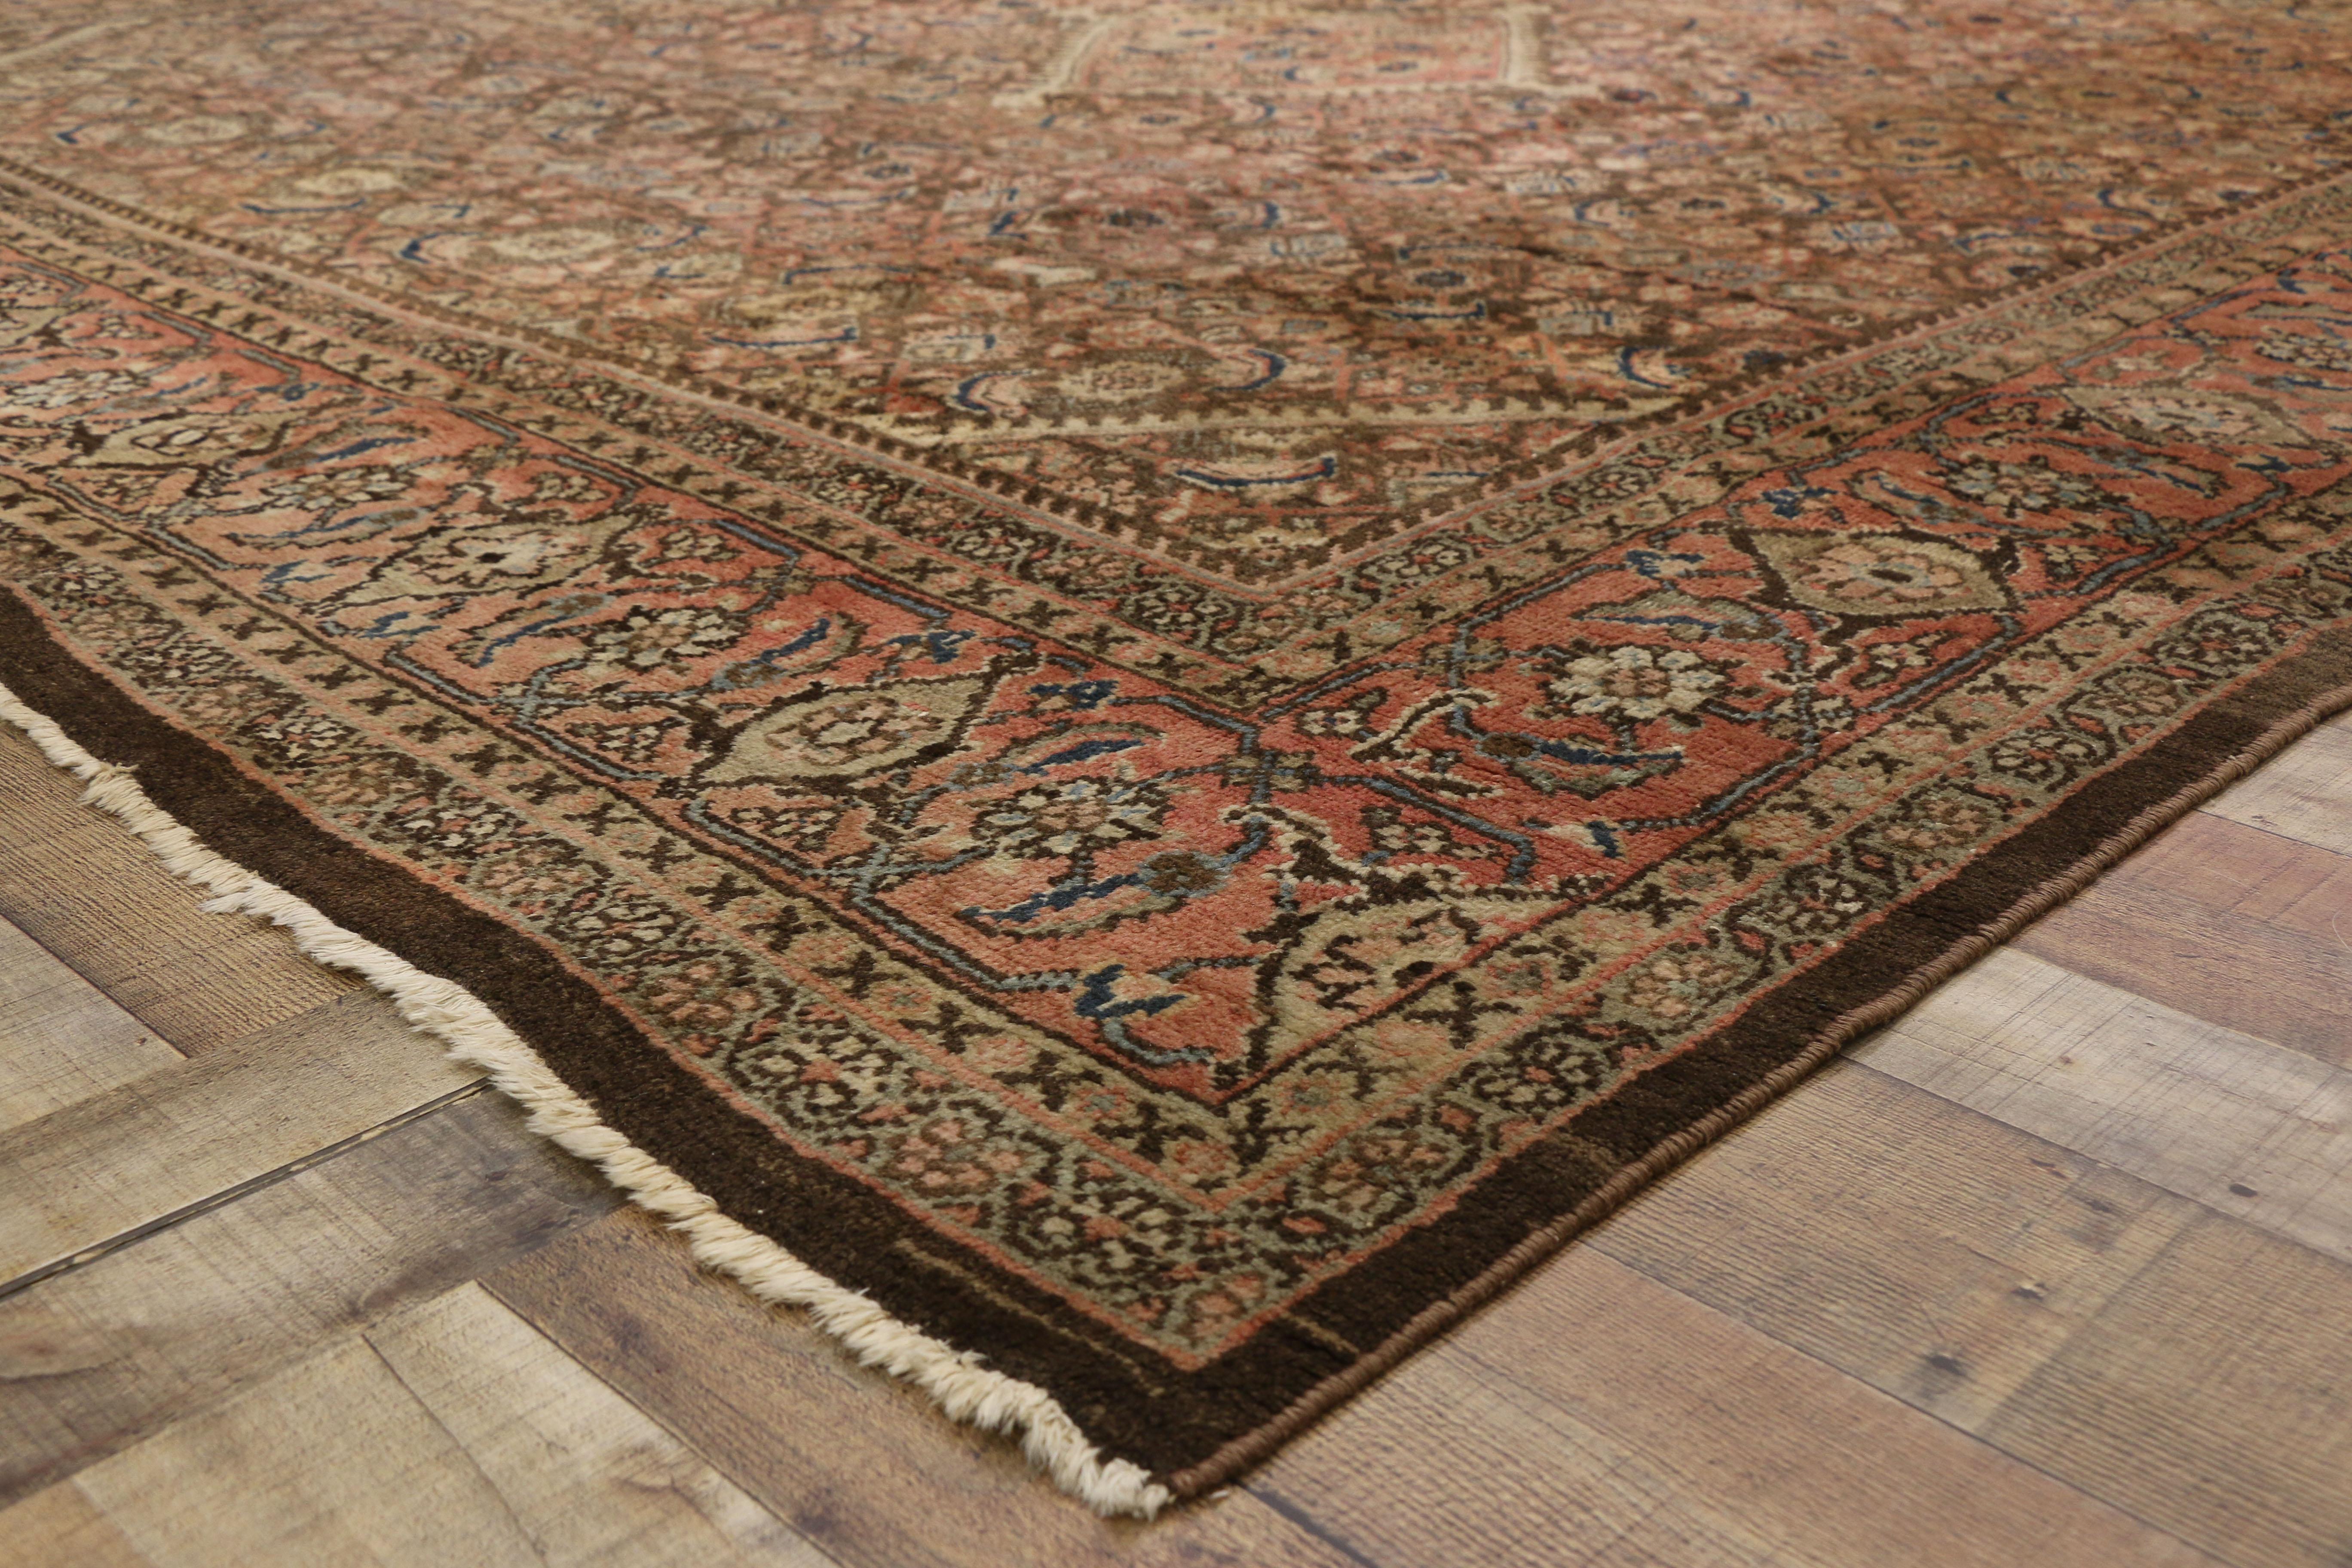 Rustic Vintage Persian Mahal Rug with English Country Cottage Style